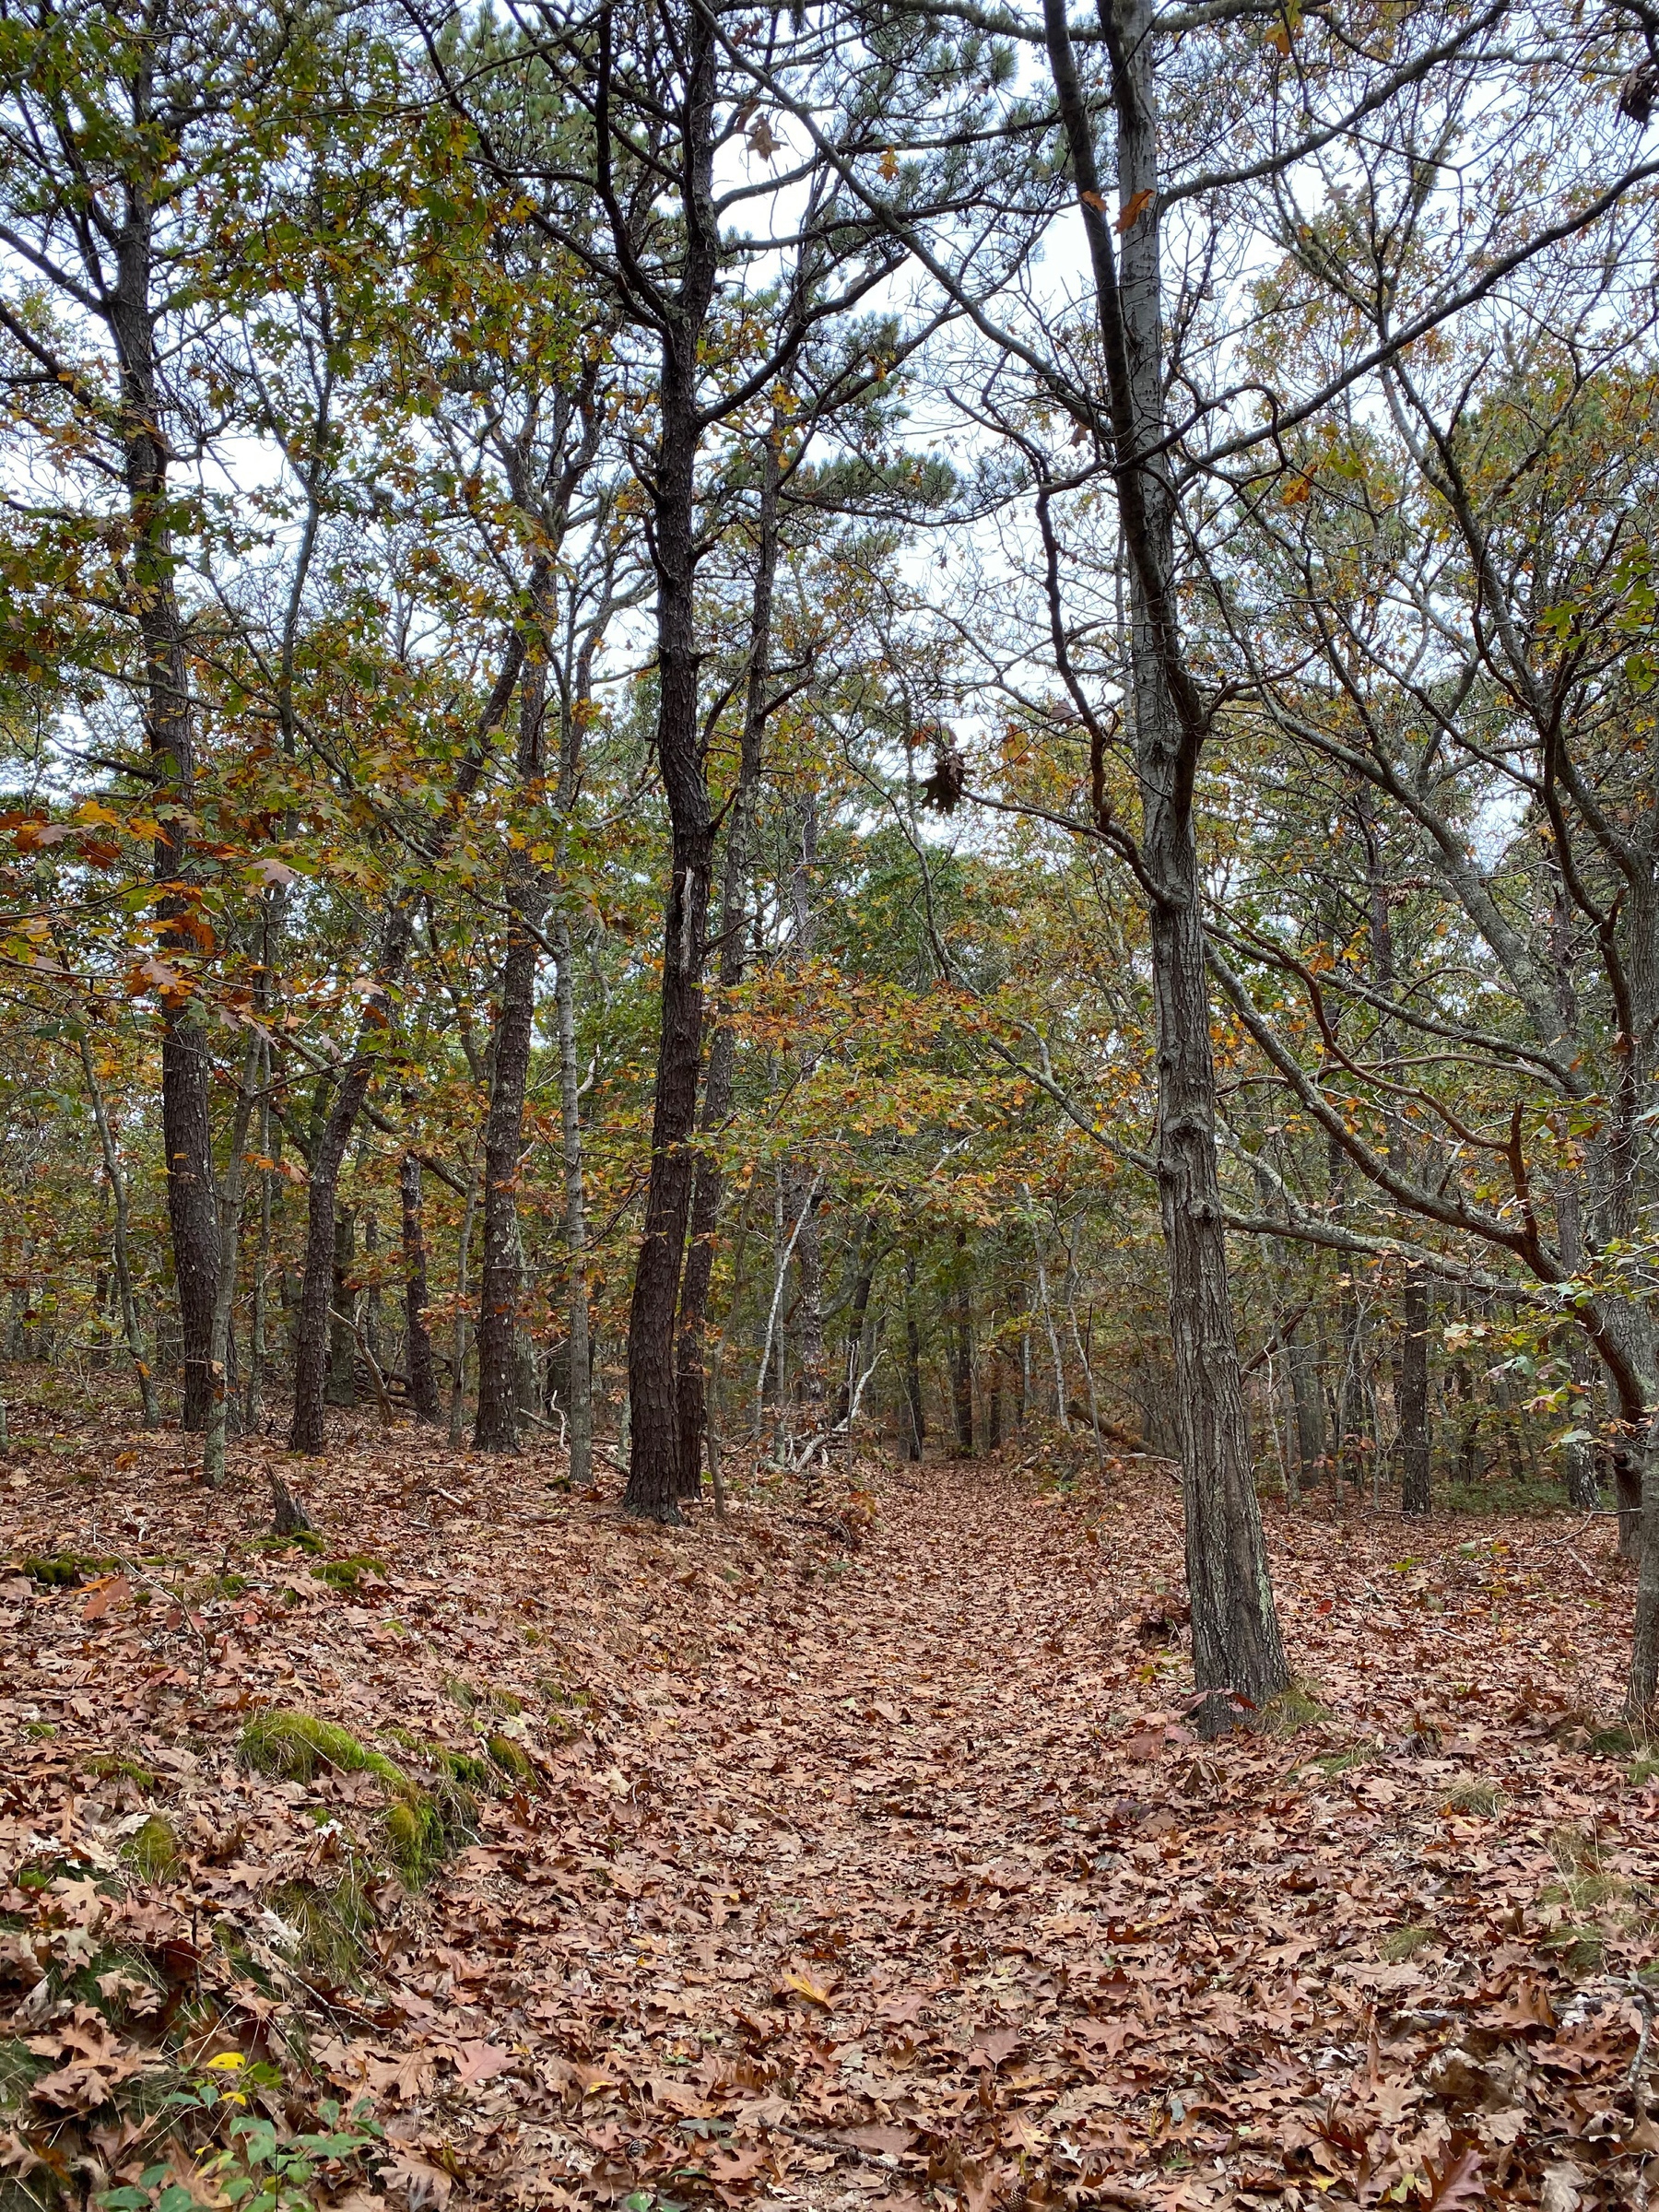 View of a forest path covered in brown leaves with trees on either side.